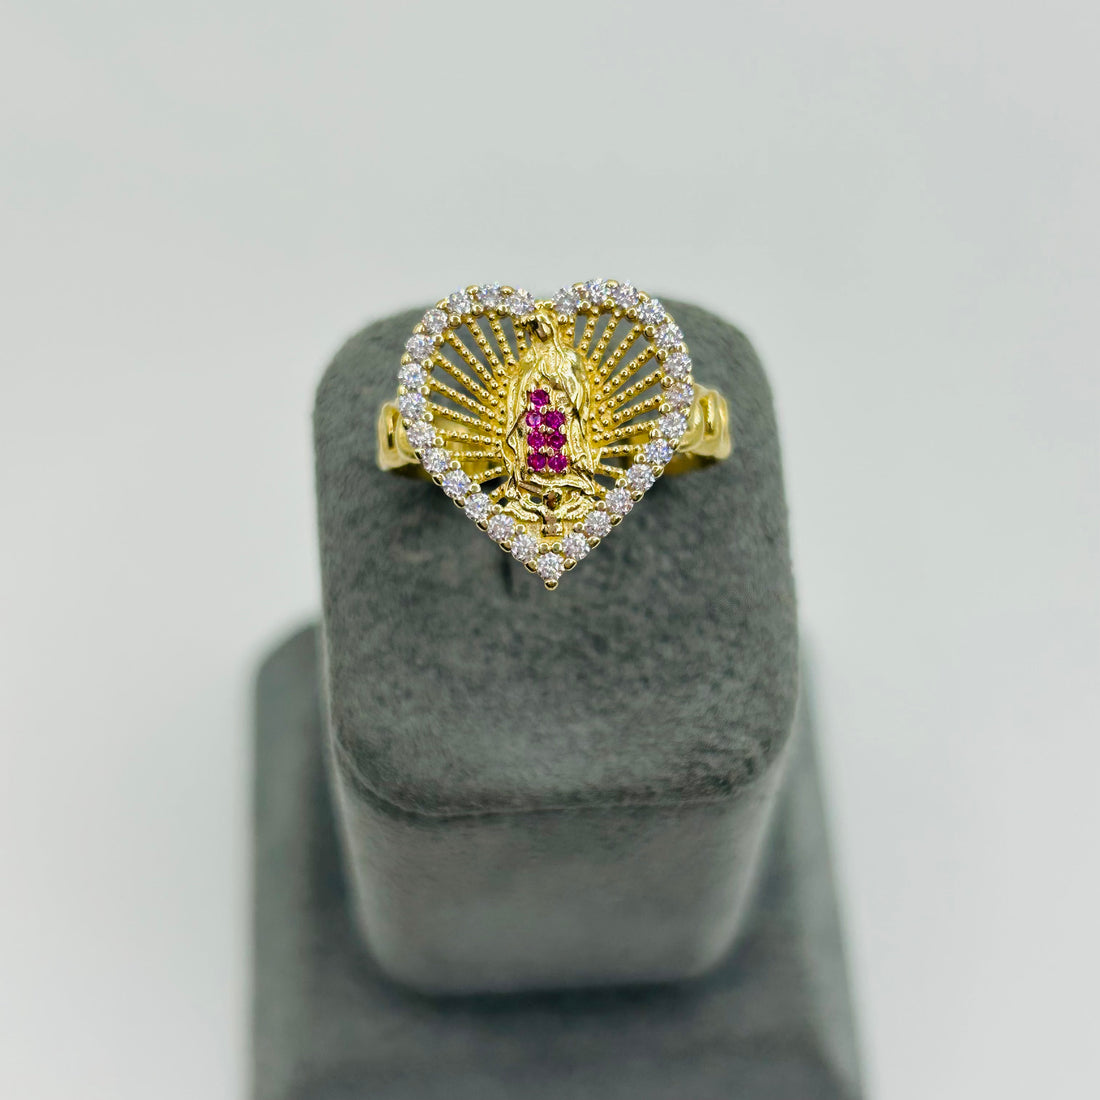 Virgin Mary Heart Ring with Ruby and White Cubics Gold Plated Ring